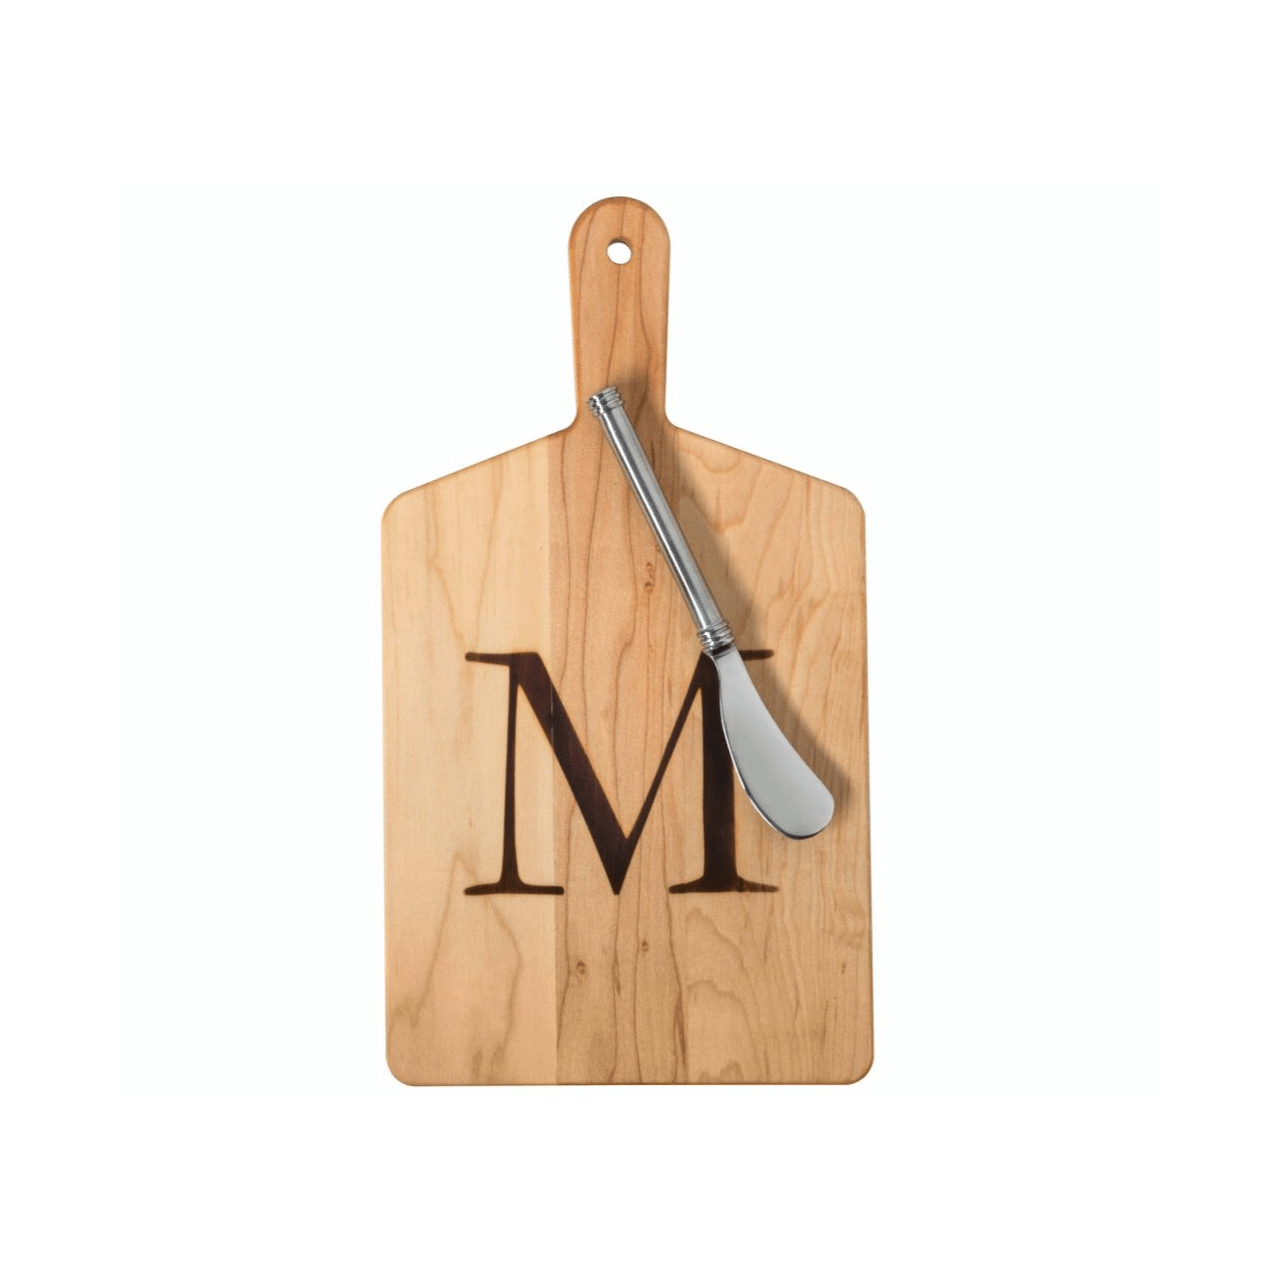 Maple Cheese Board with a Stamped N and Metal Spreader